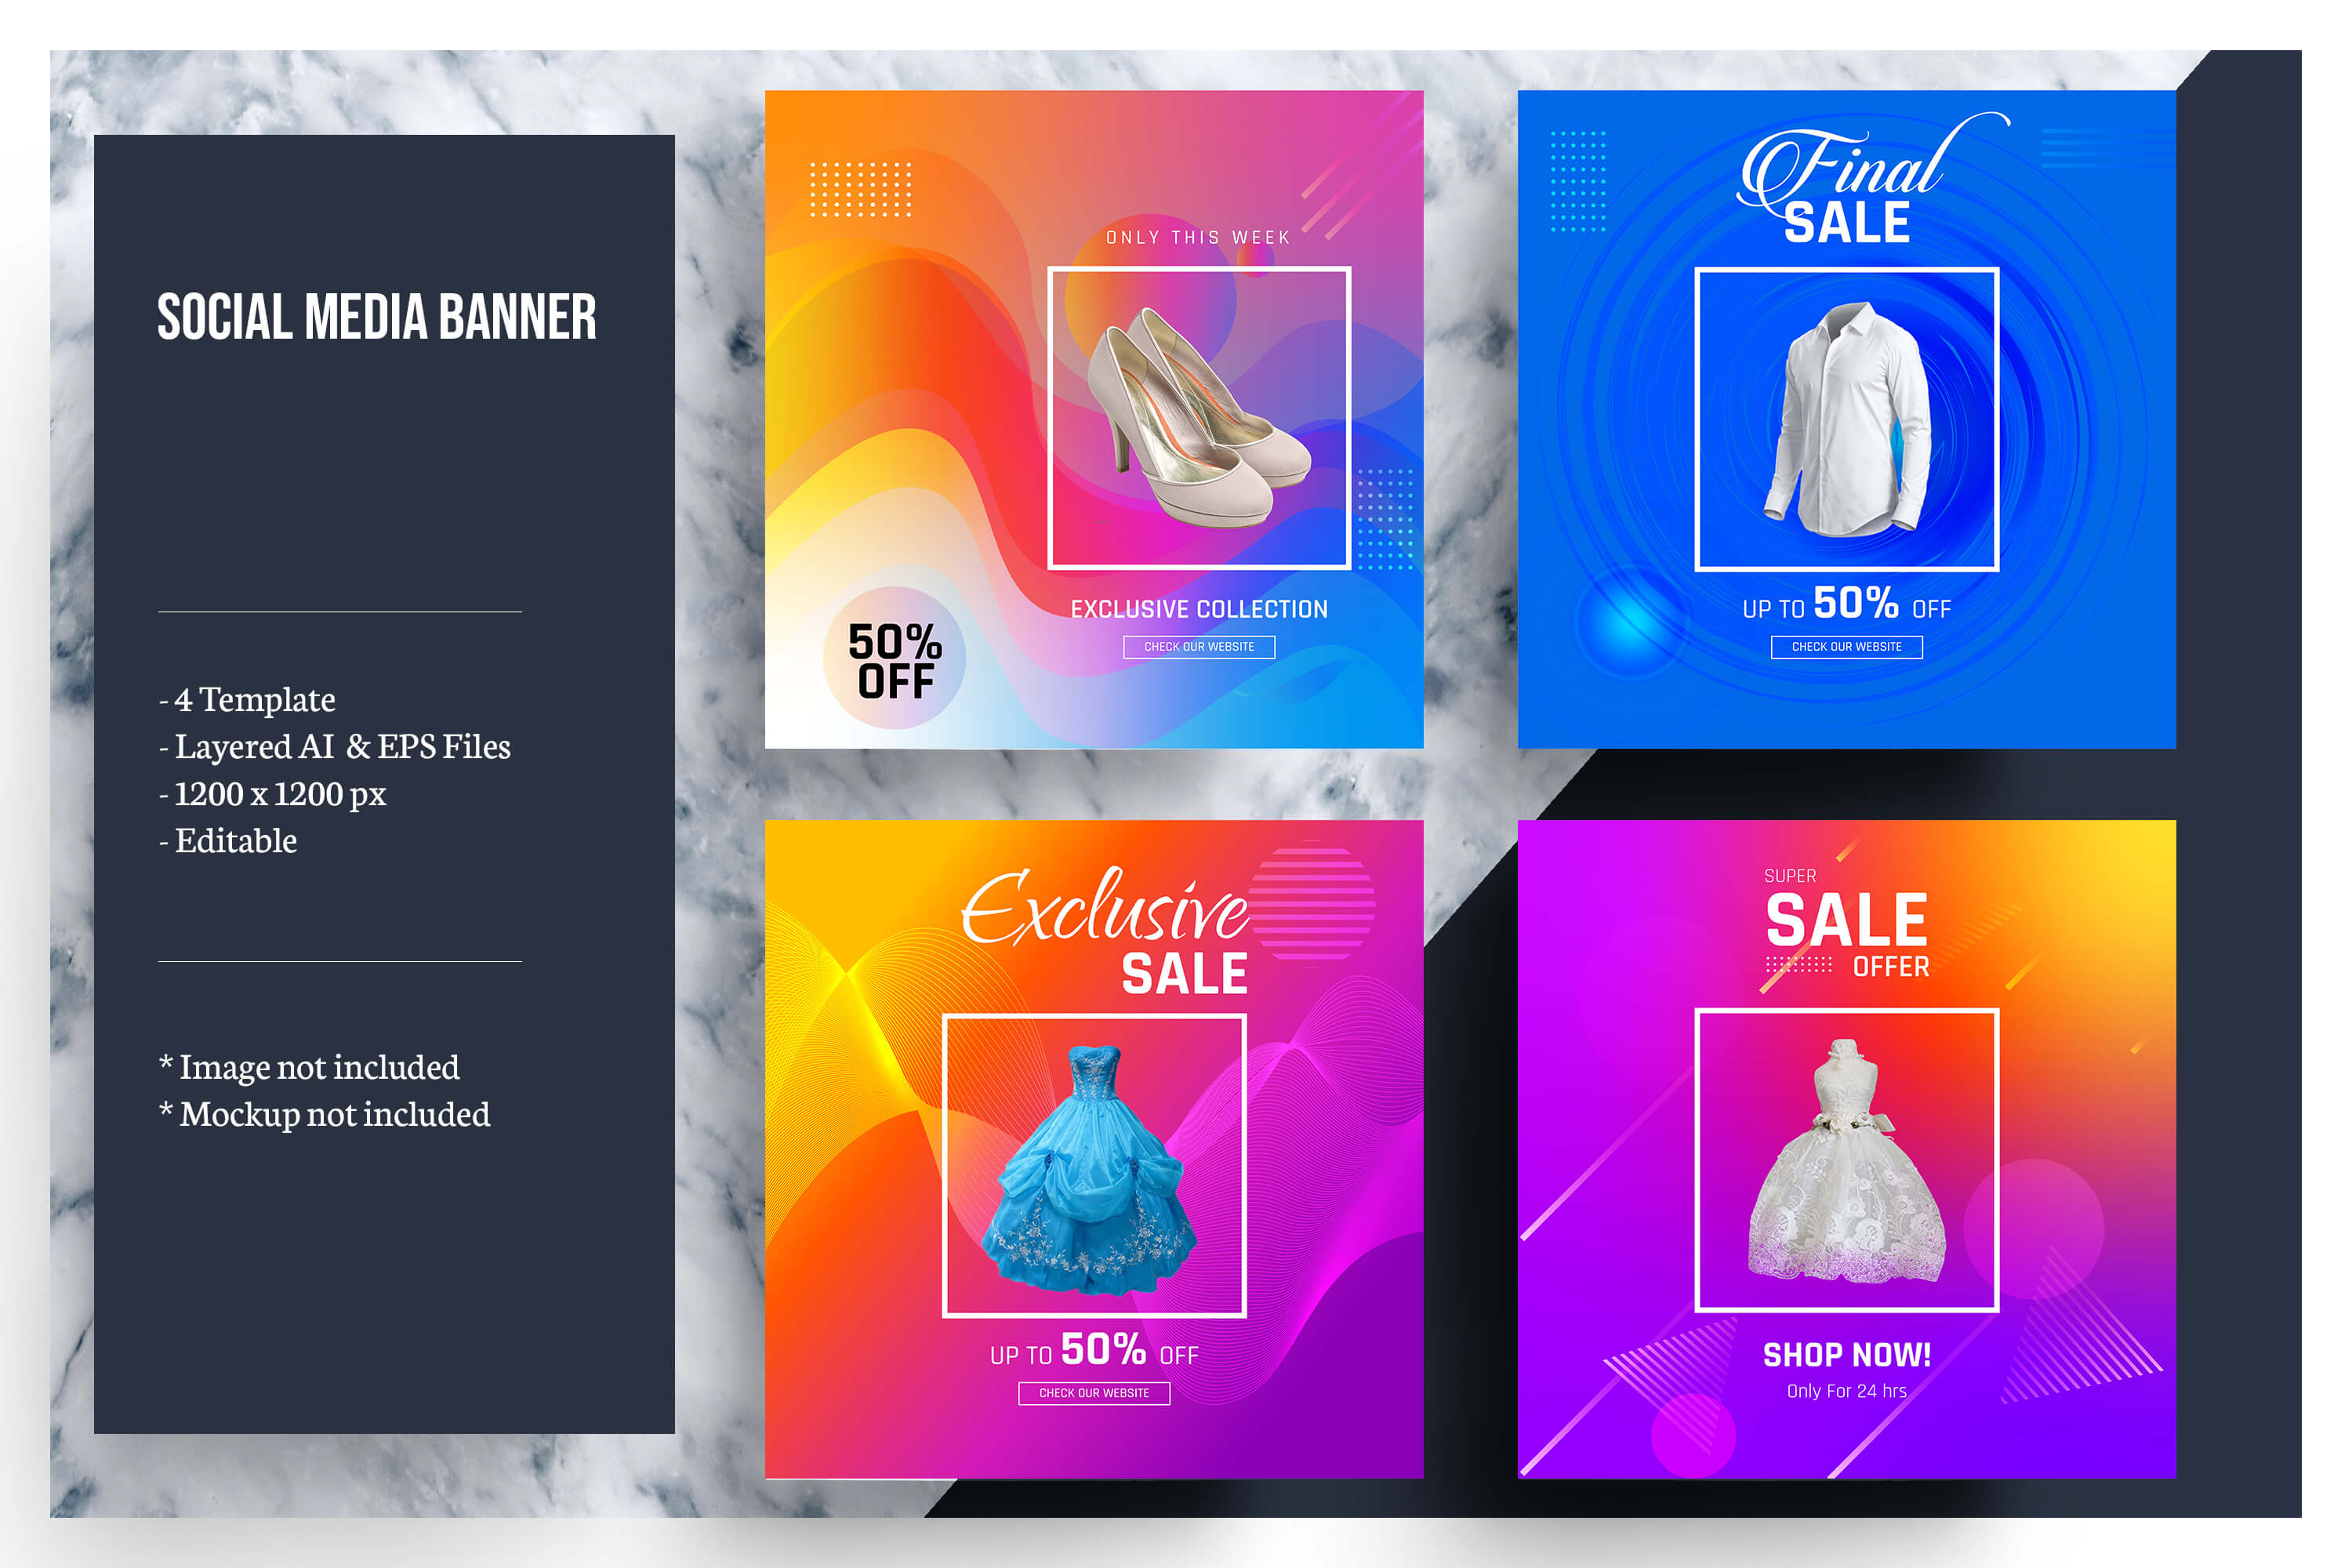 Colorful Social Media Banner Template Throughout Product Banner Template